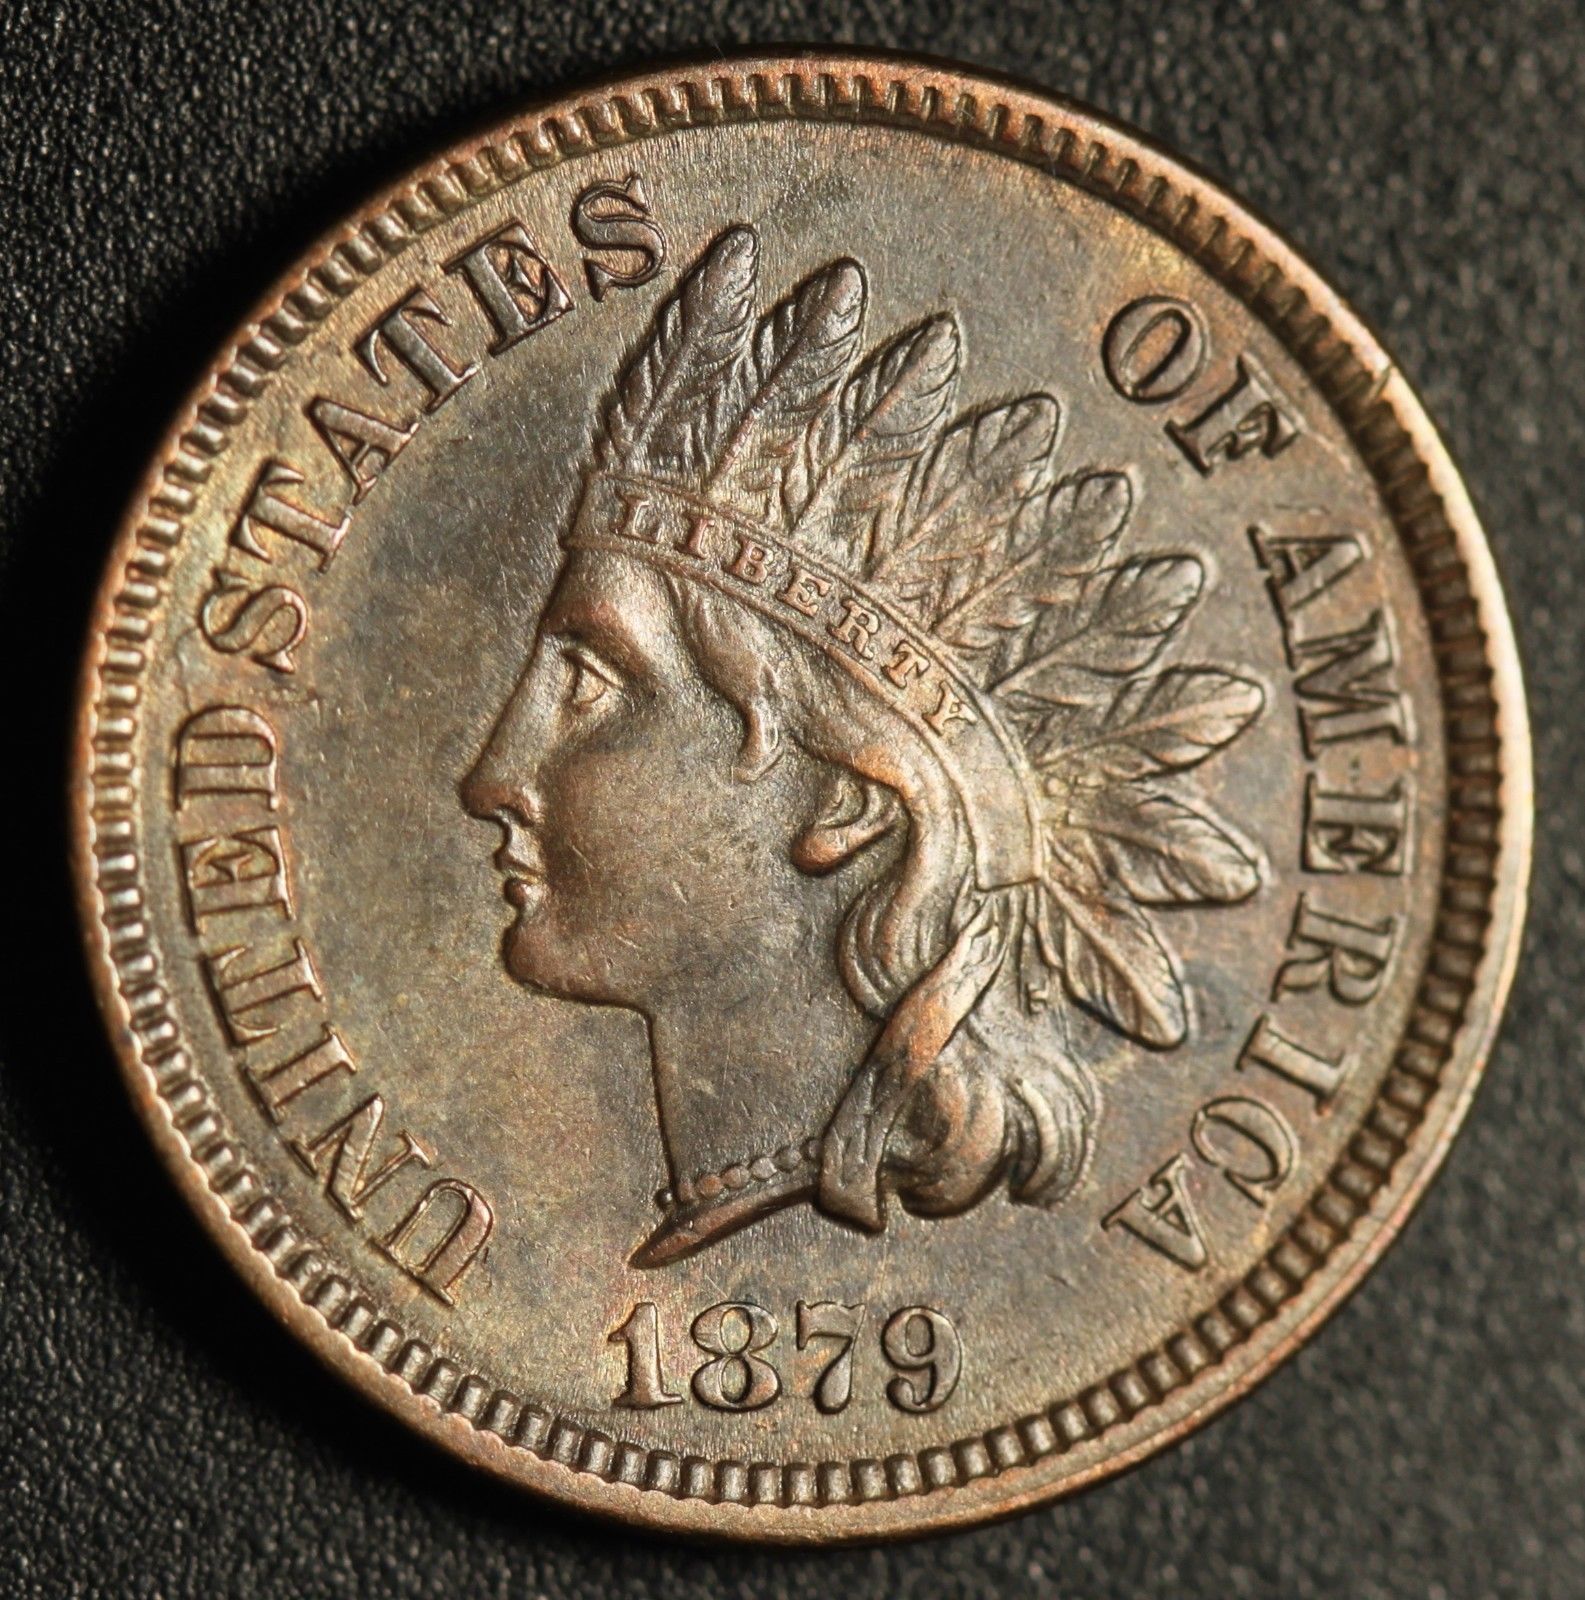 1879 RPD-005 - Indian Head Penny - Photo by Ed Nathanson